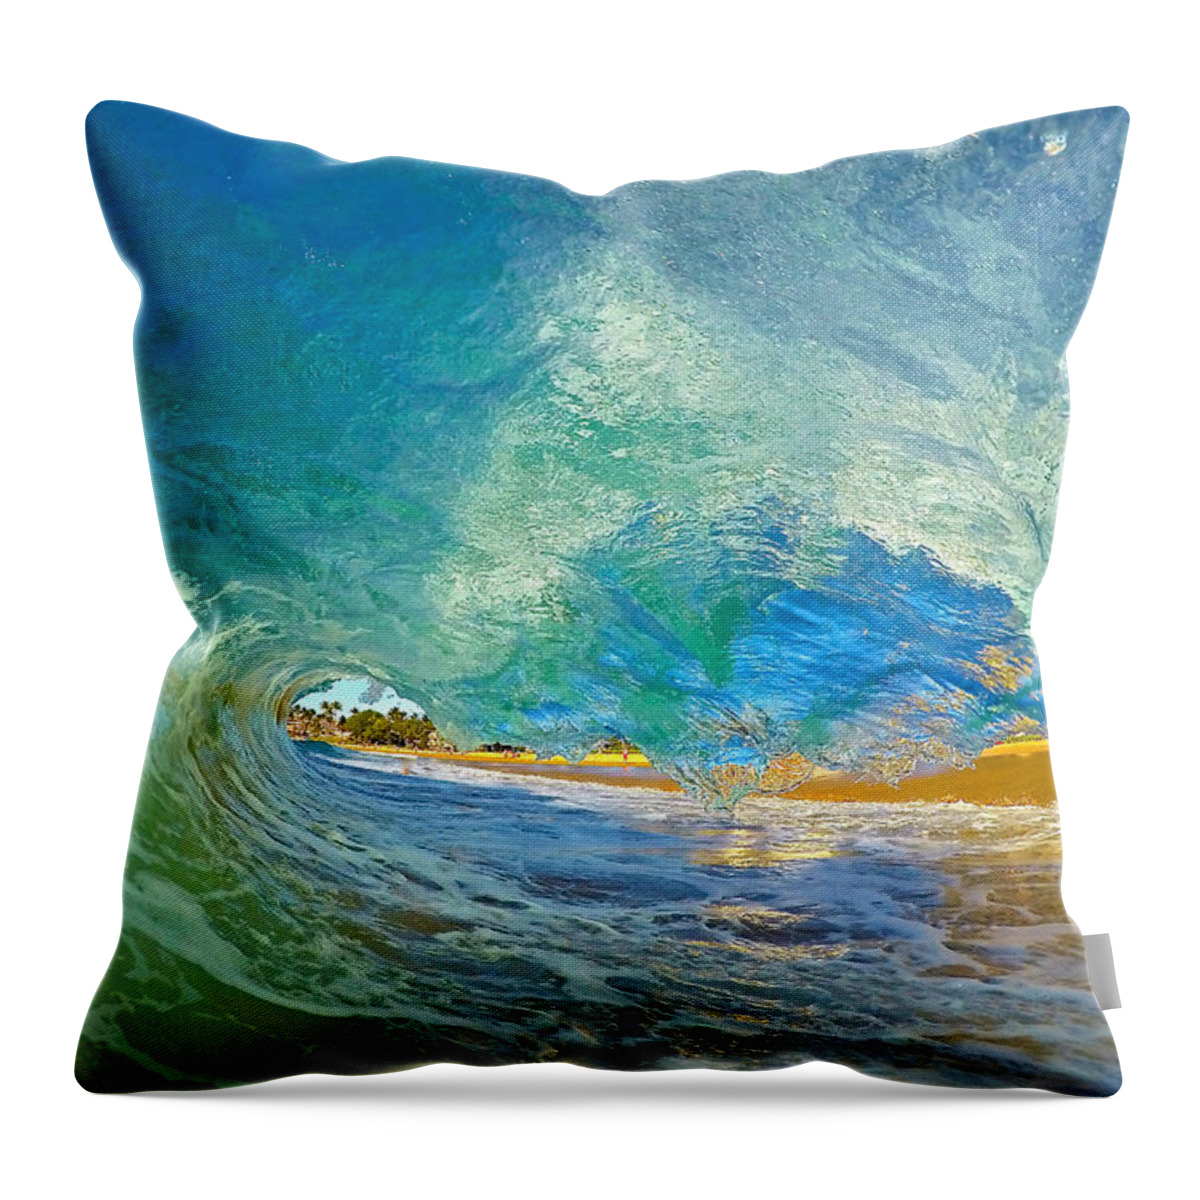 Kaanapali Maui Hawaii Seascape Ocean Wave Shorebreak Throw Pillow featuring the photograph Kaanapali Wave by James Roemmling